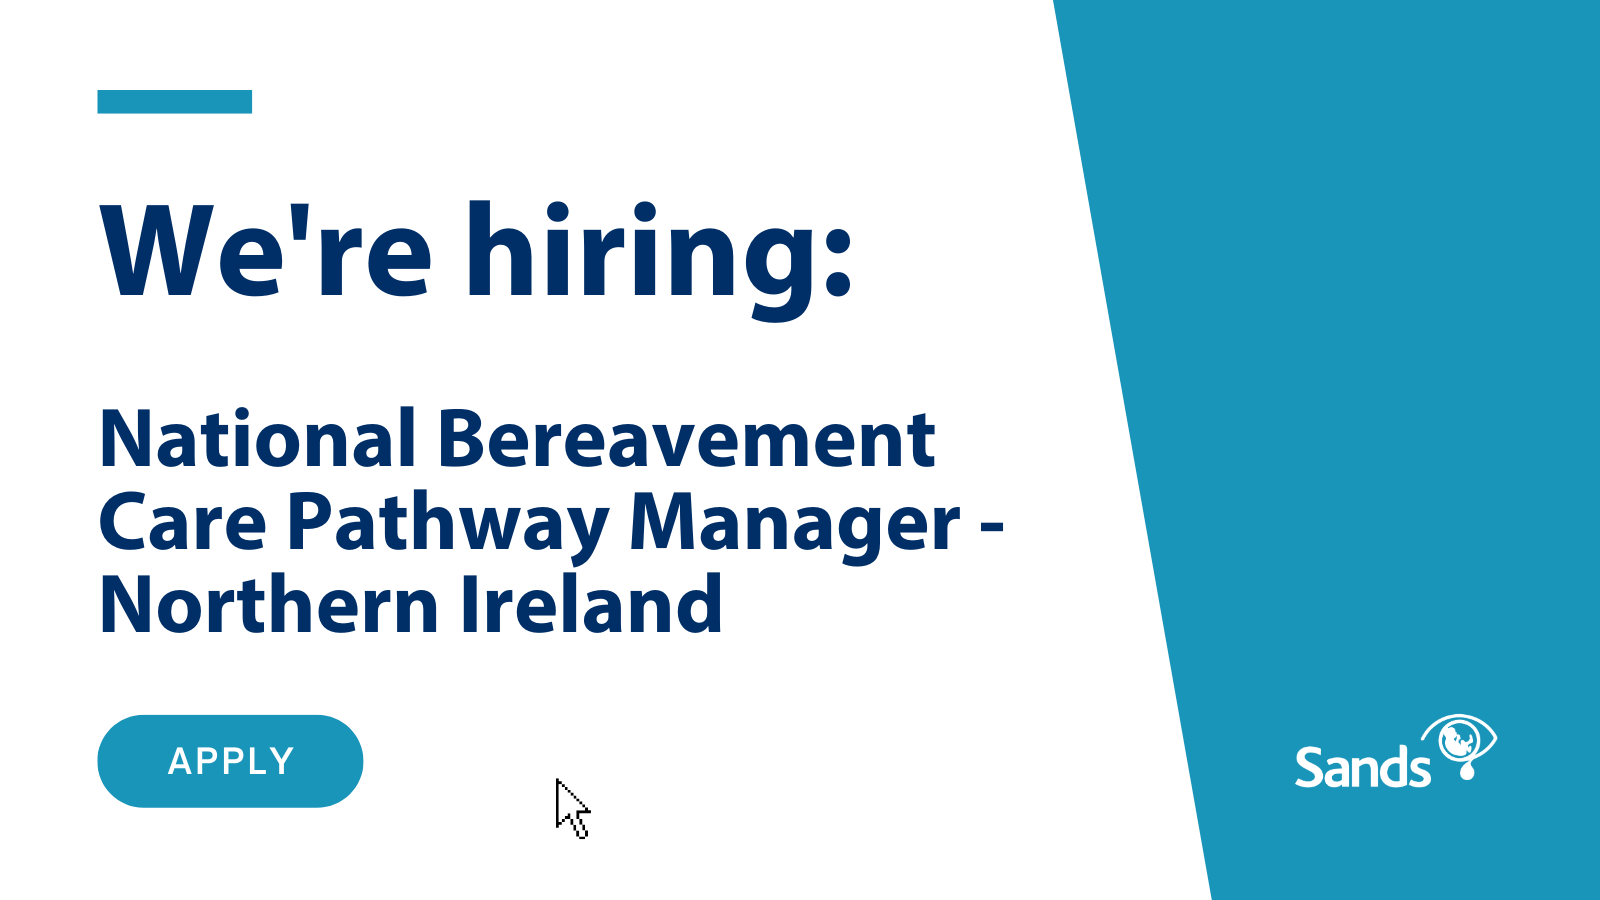 We are hiring National Bereavement Care Pathway Manager Northern Ireland